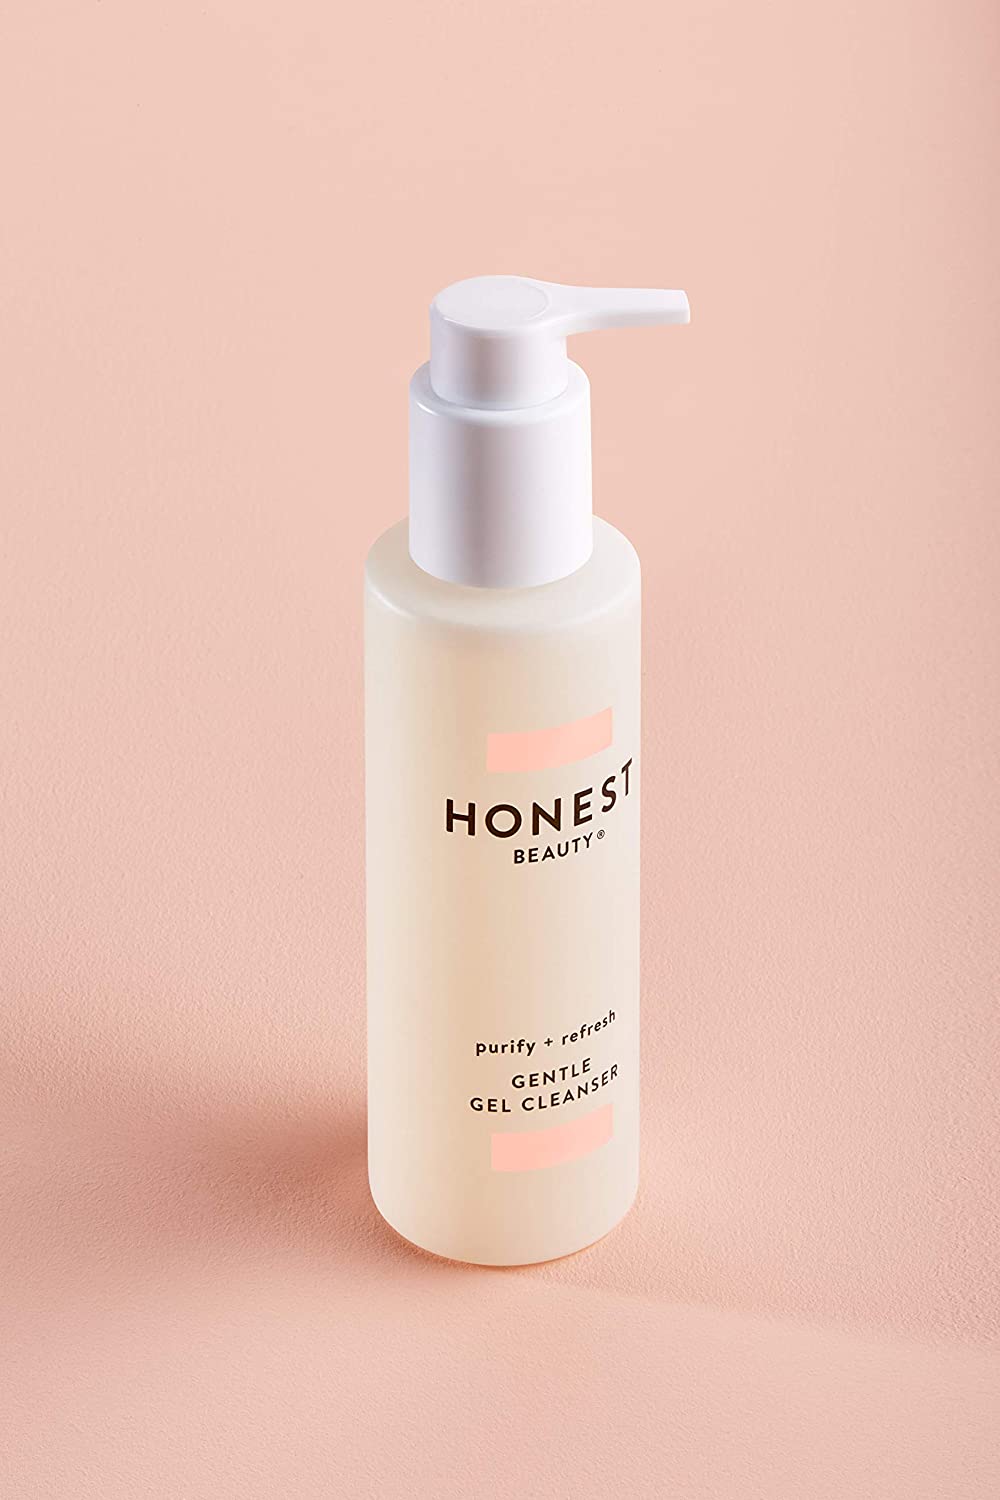 Honest Beauty Gentle Gel Cleanser with Chamomile & Calendula Extracts